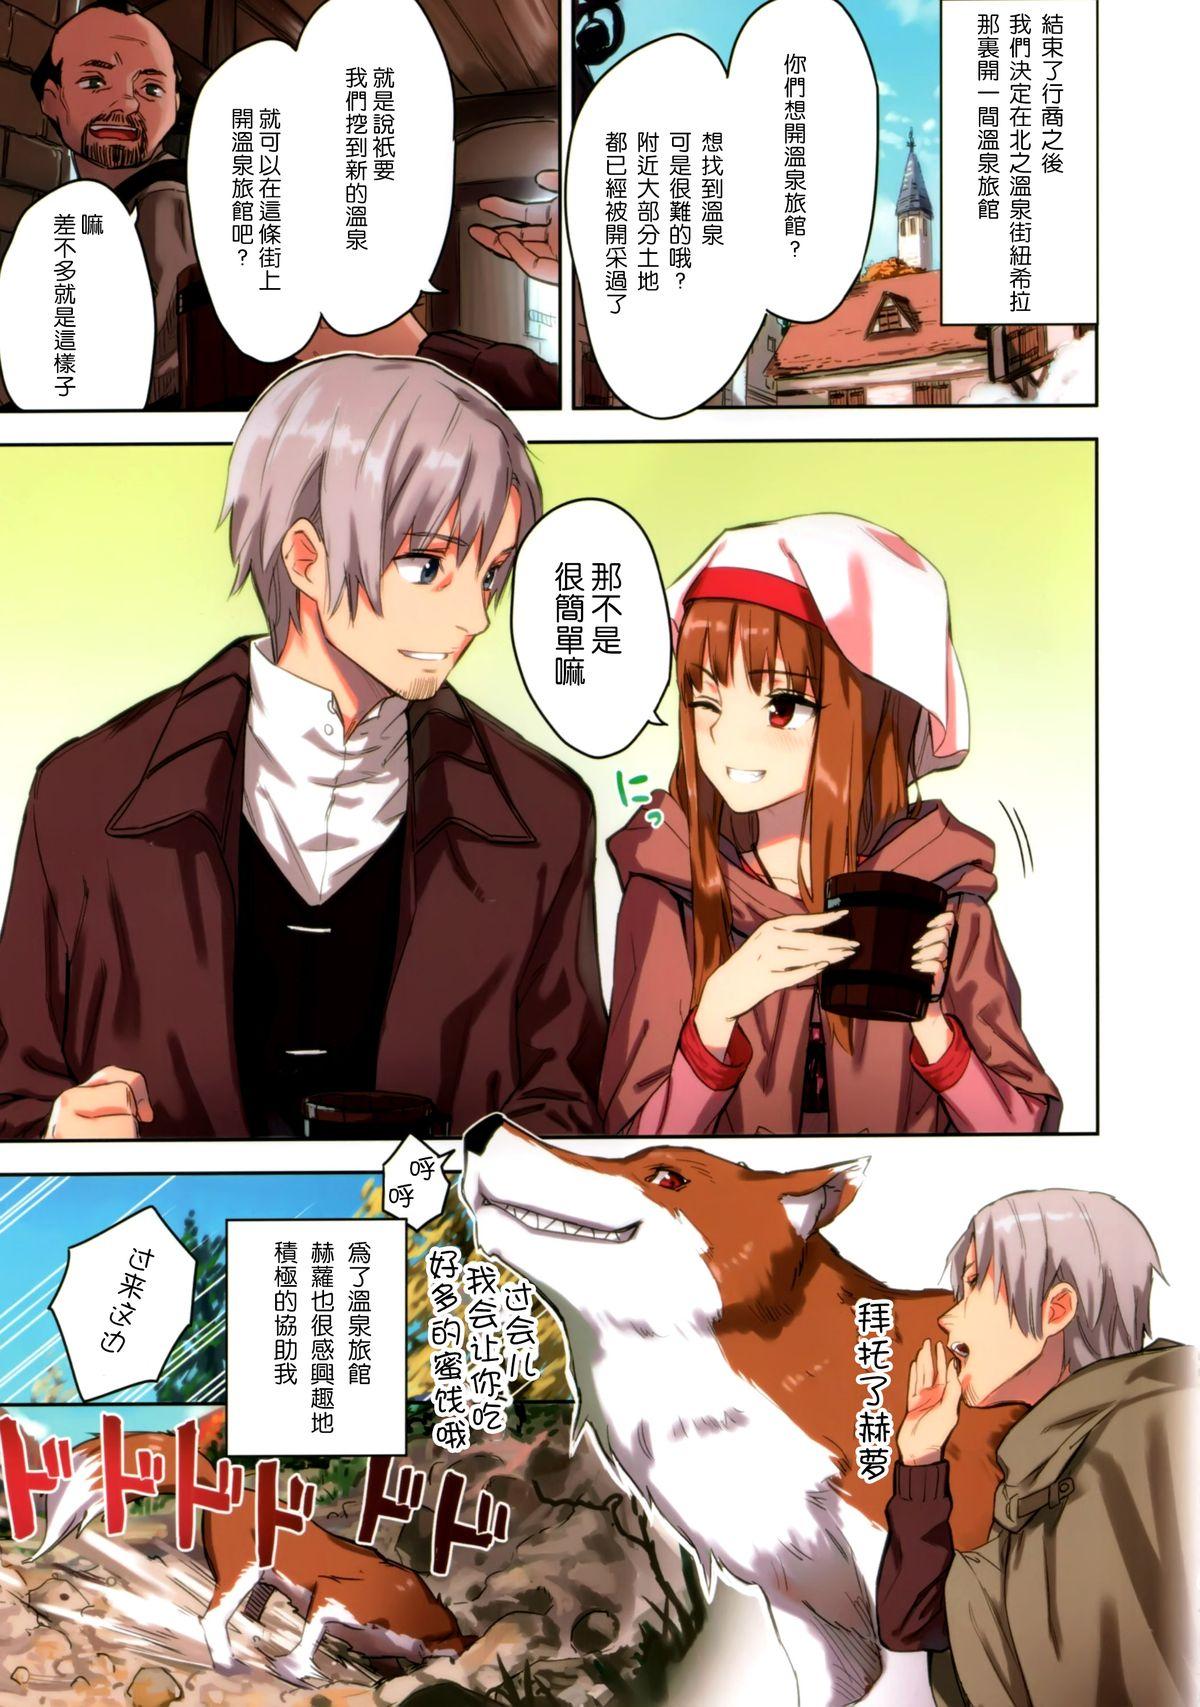 Mum Wacchi to Nyohhira Bon FULL COLOR - Spice and wolf Hot Milf - Page 6